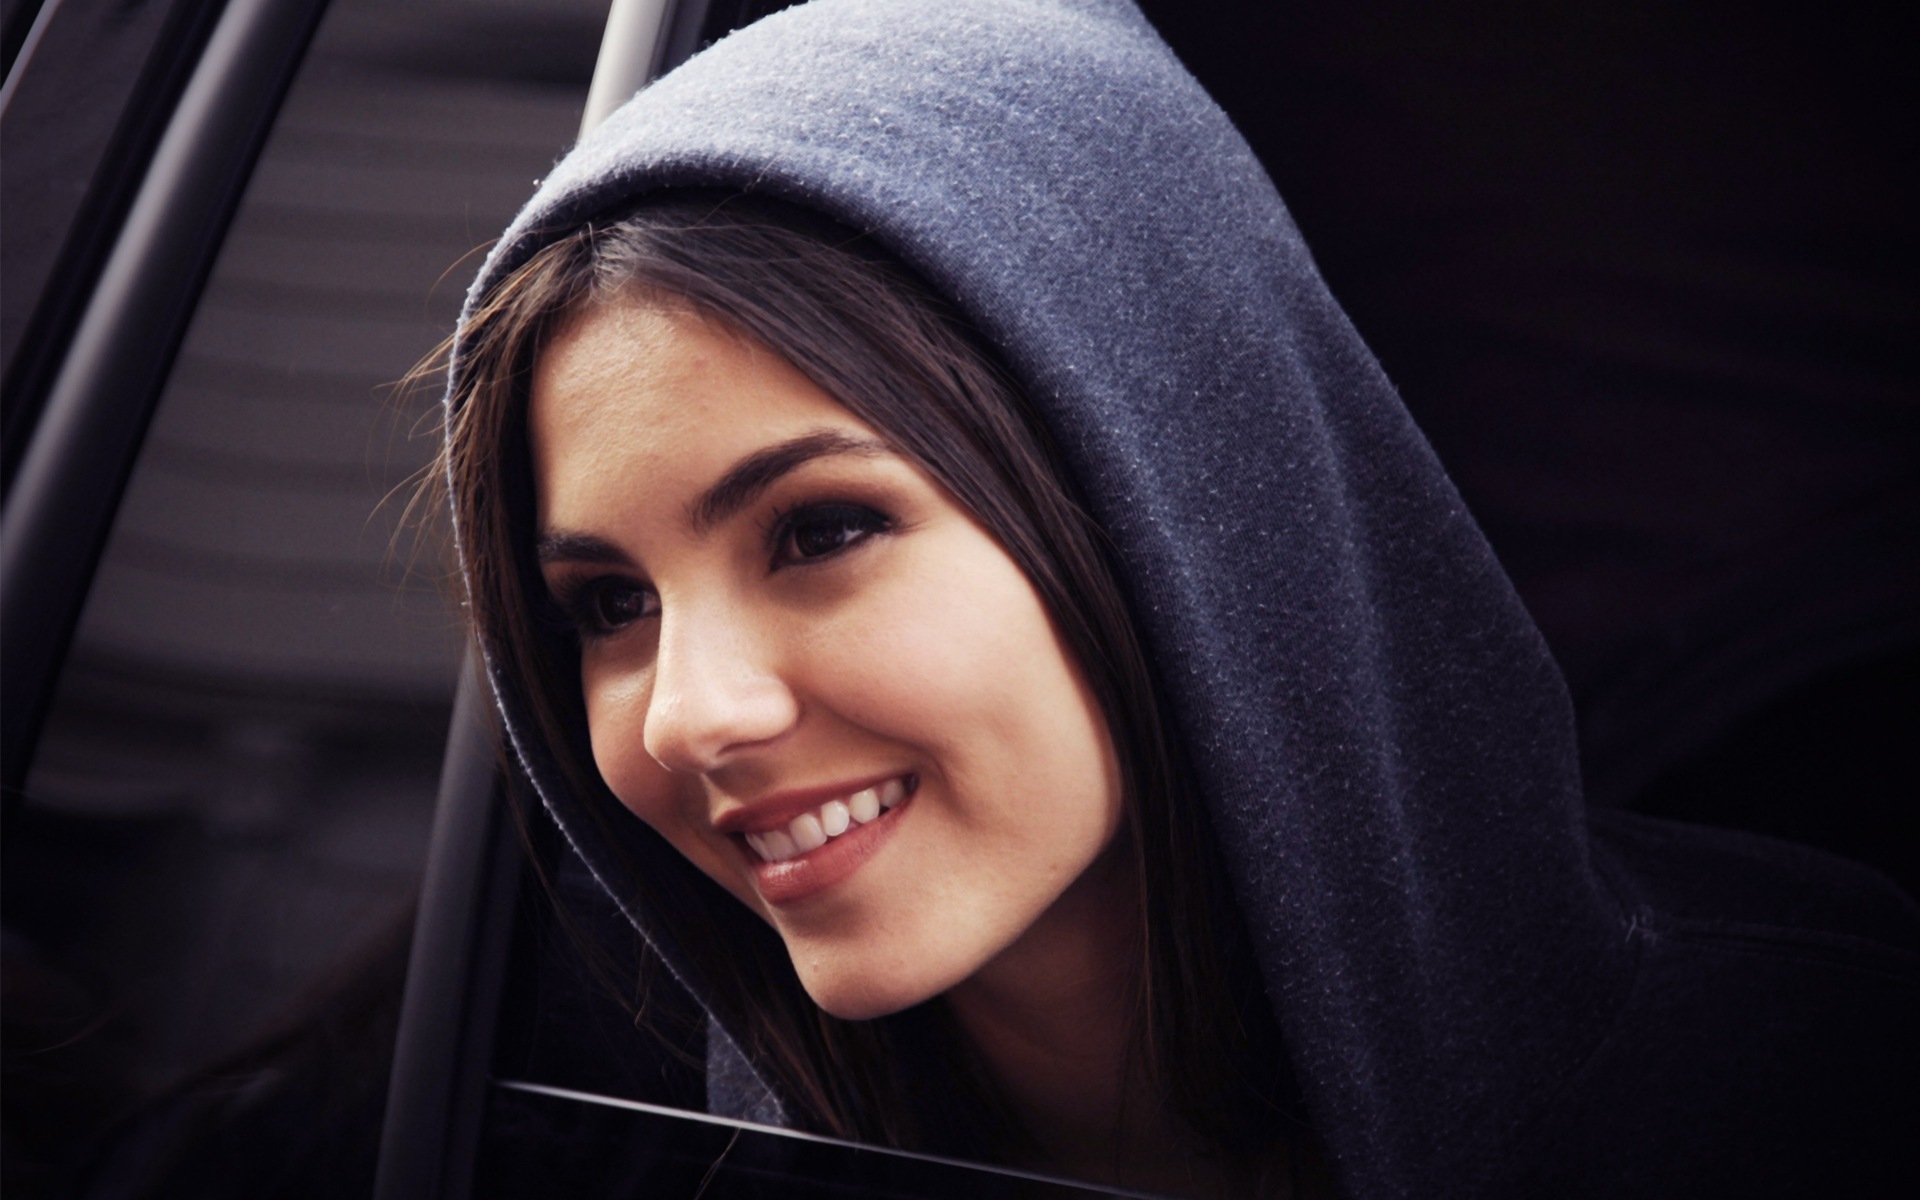 Victoria Justice beautiful wallpapers #28 - 1920x1200